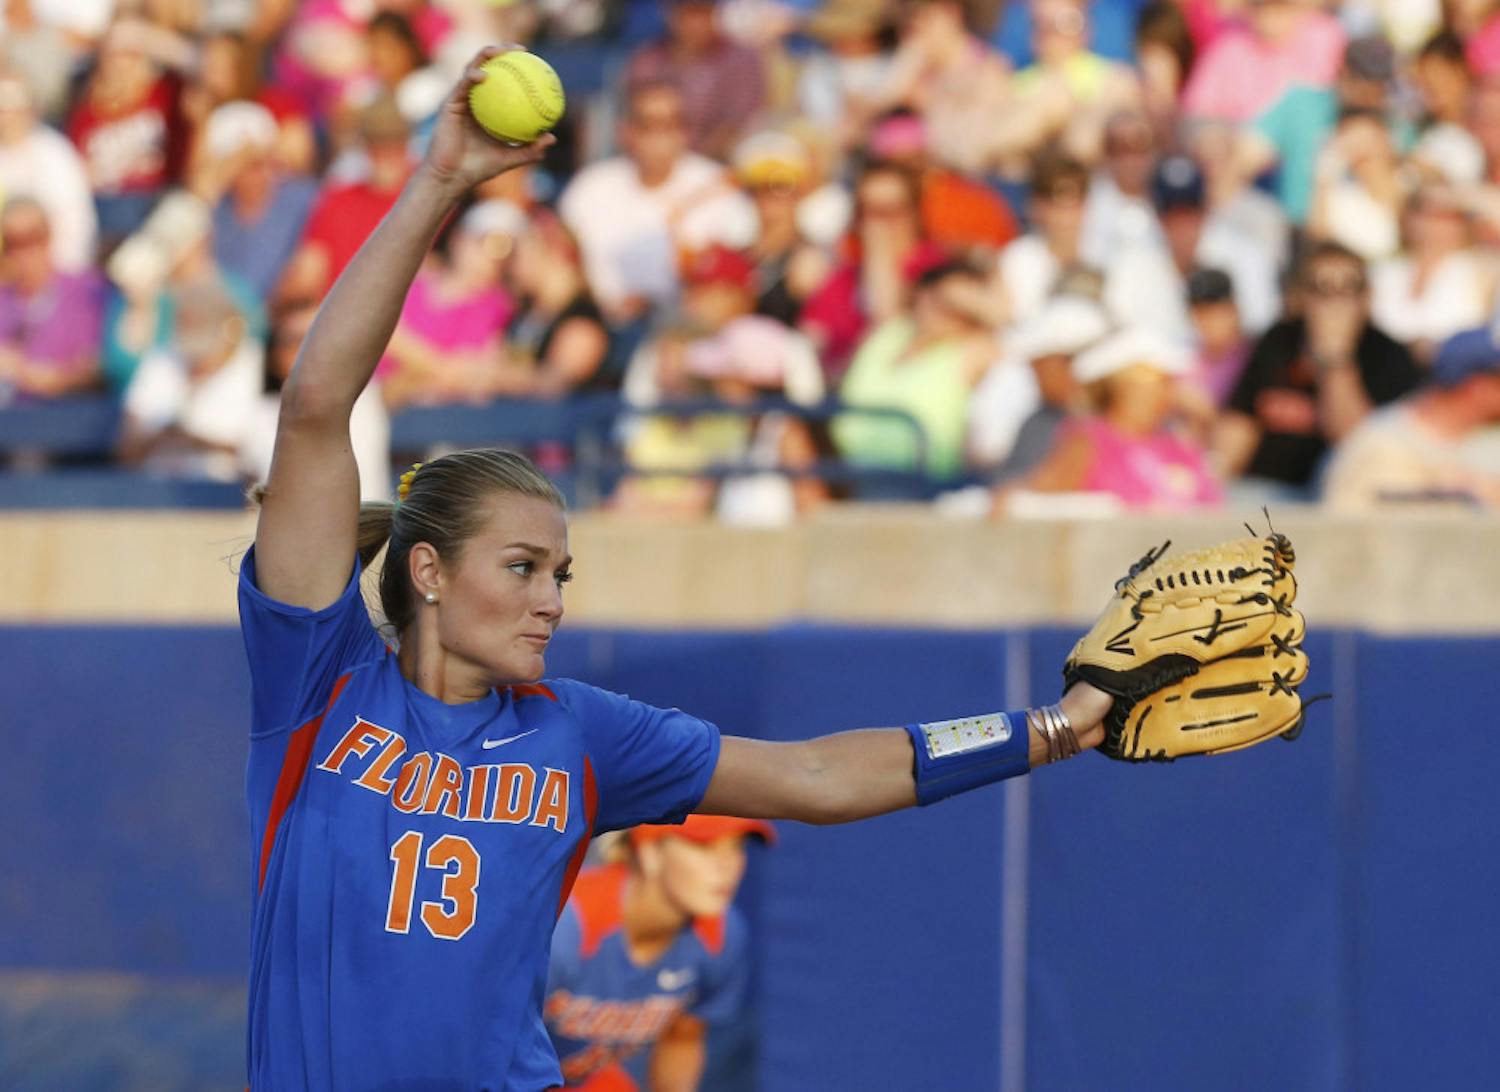 Hannah Rogers delivers a pitch in the third inning of Florida's 5-0 win against Alabama in Game 1 of the Women's College World Series Championship Series in Oklahoma City on Monday